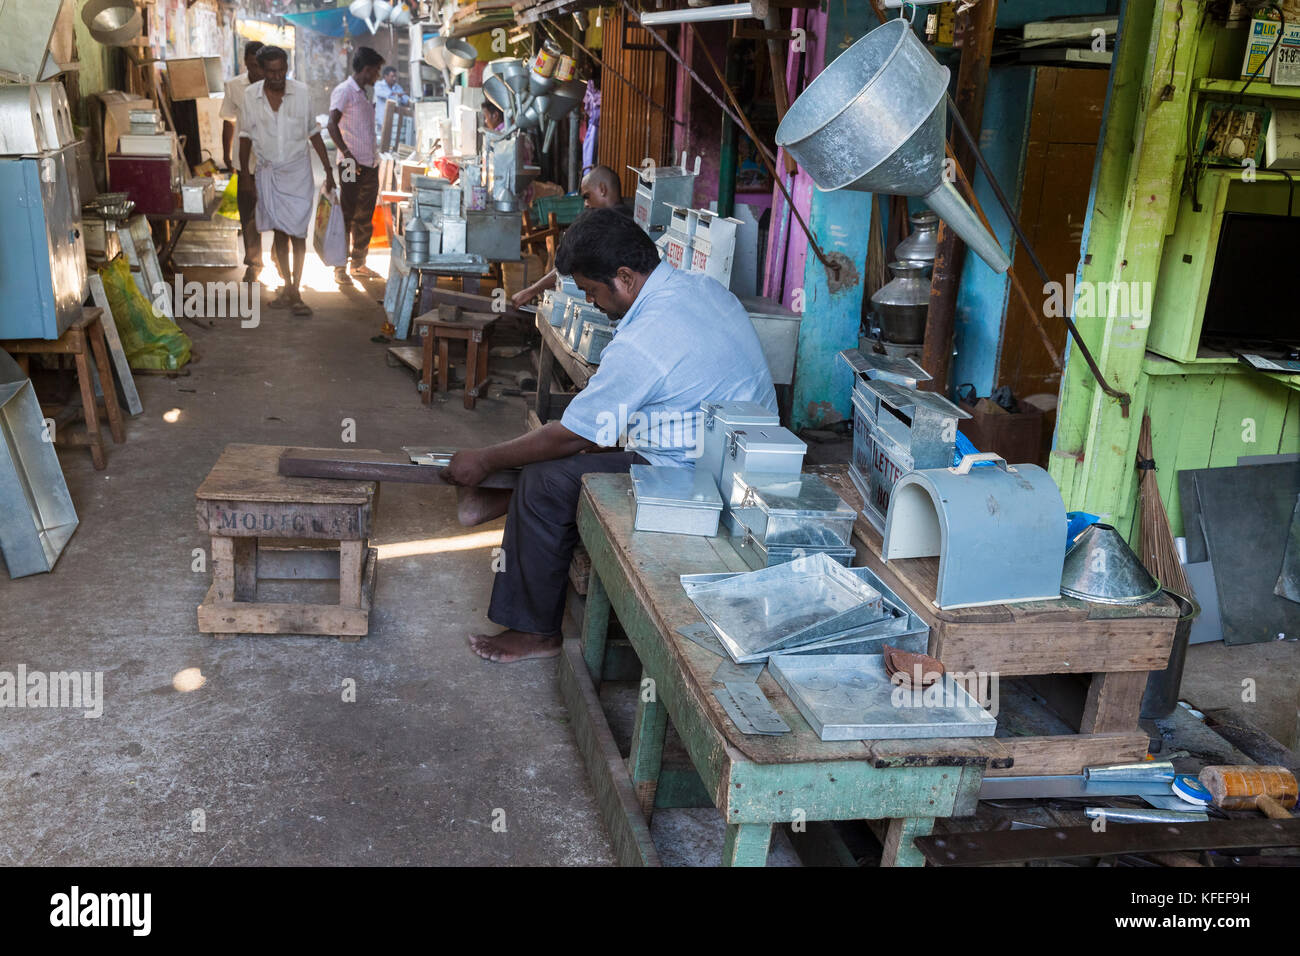 PONDICHERY, PUDUCHERY, INDIA - SEPTEMBER 09, 2017? Unidentified man makes metal mail boxes at the outdoor market place. Hand made in India Stock Photo